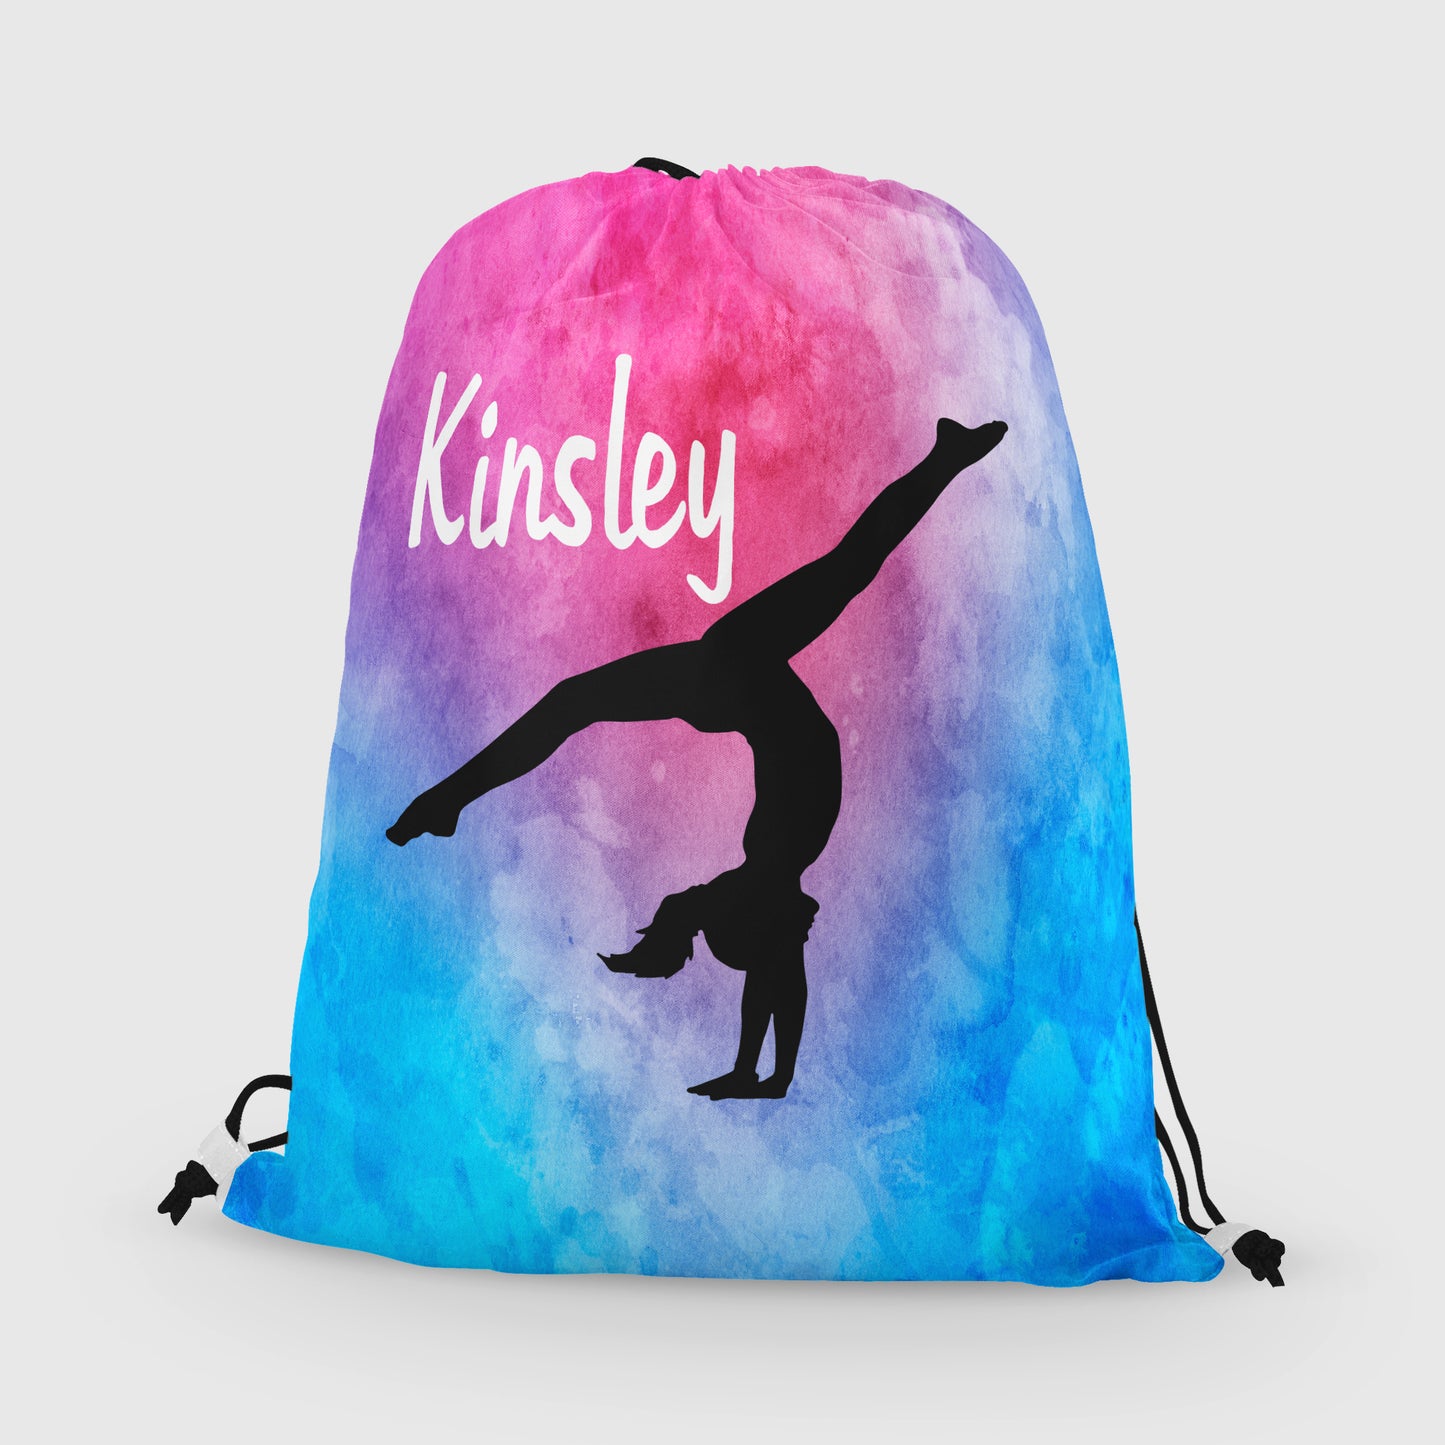 Personalized Gymnast Handstand Drawstring Bag, Perfect Gymnast Gift!